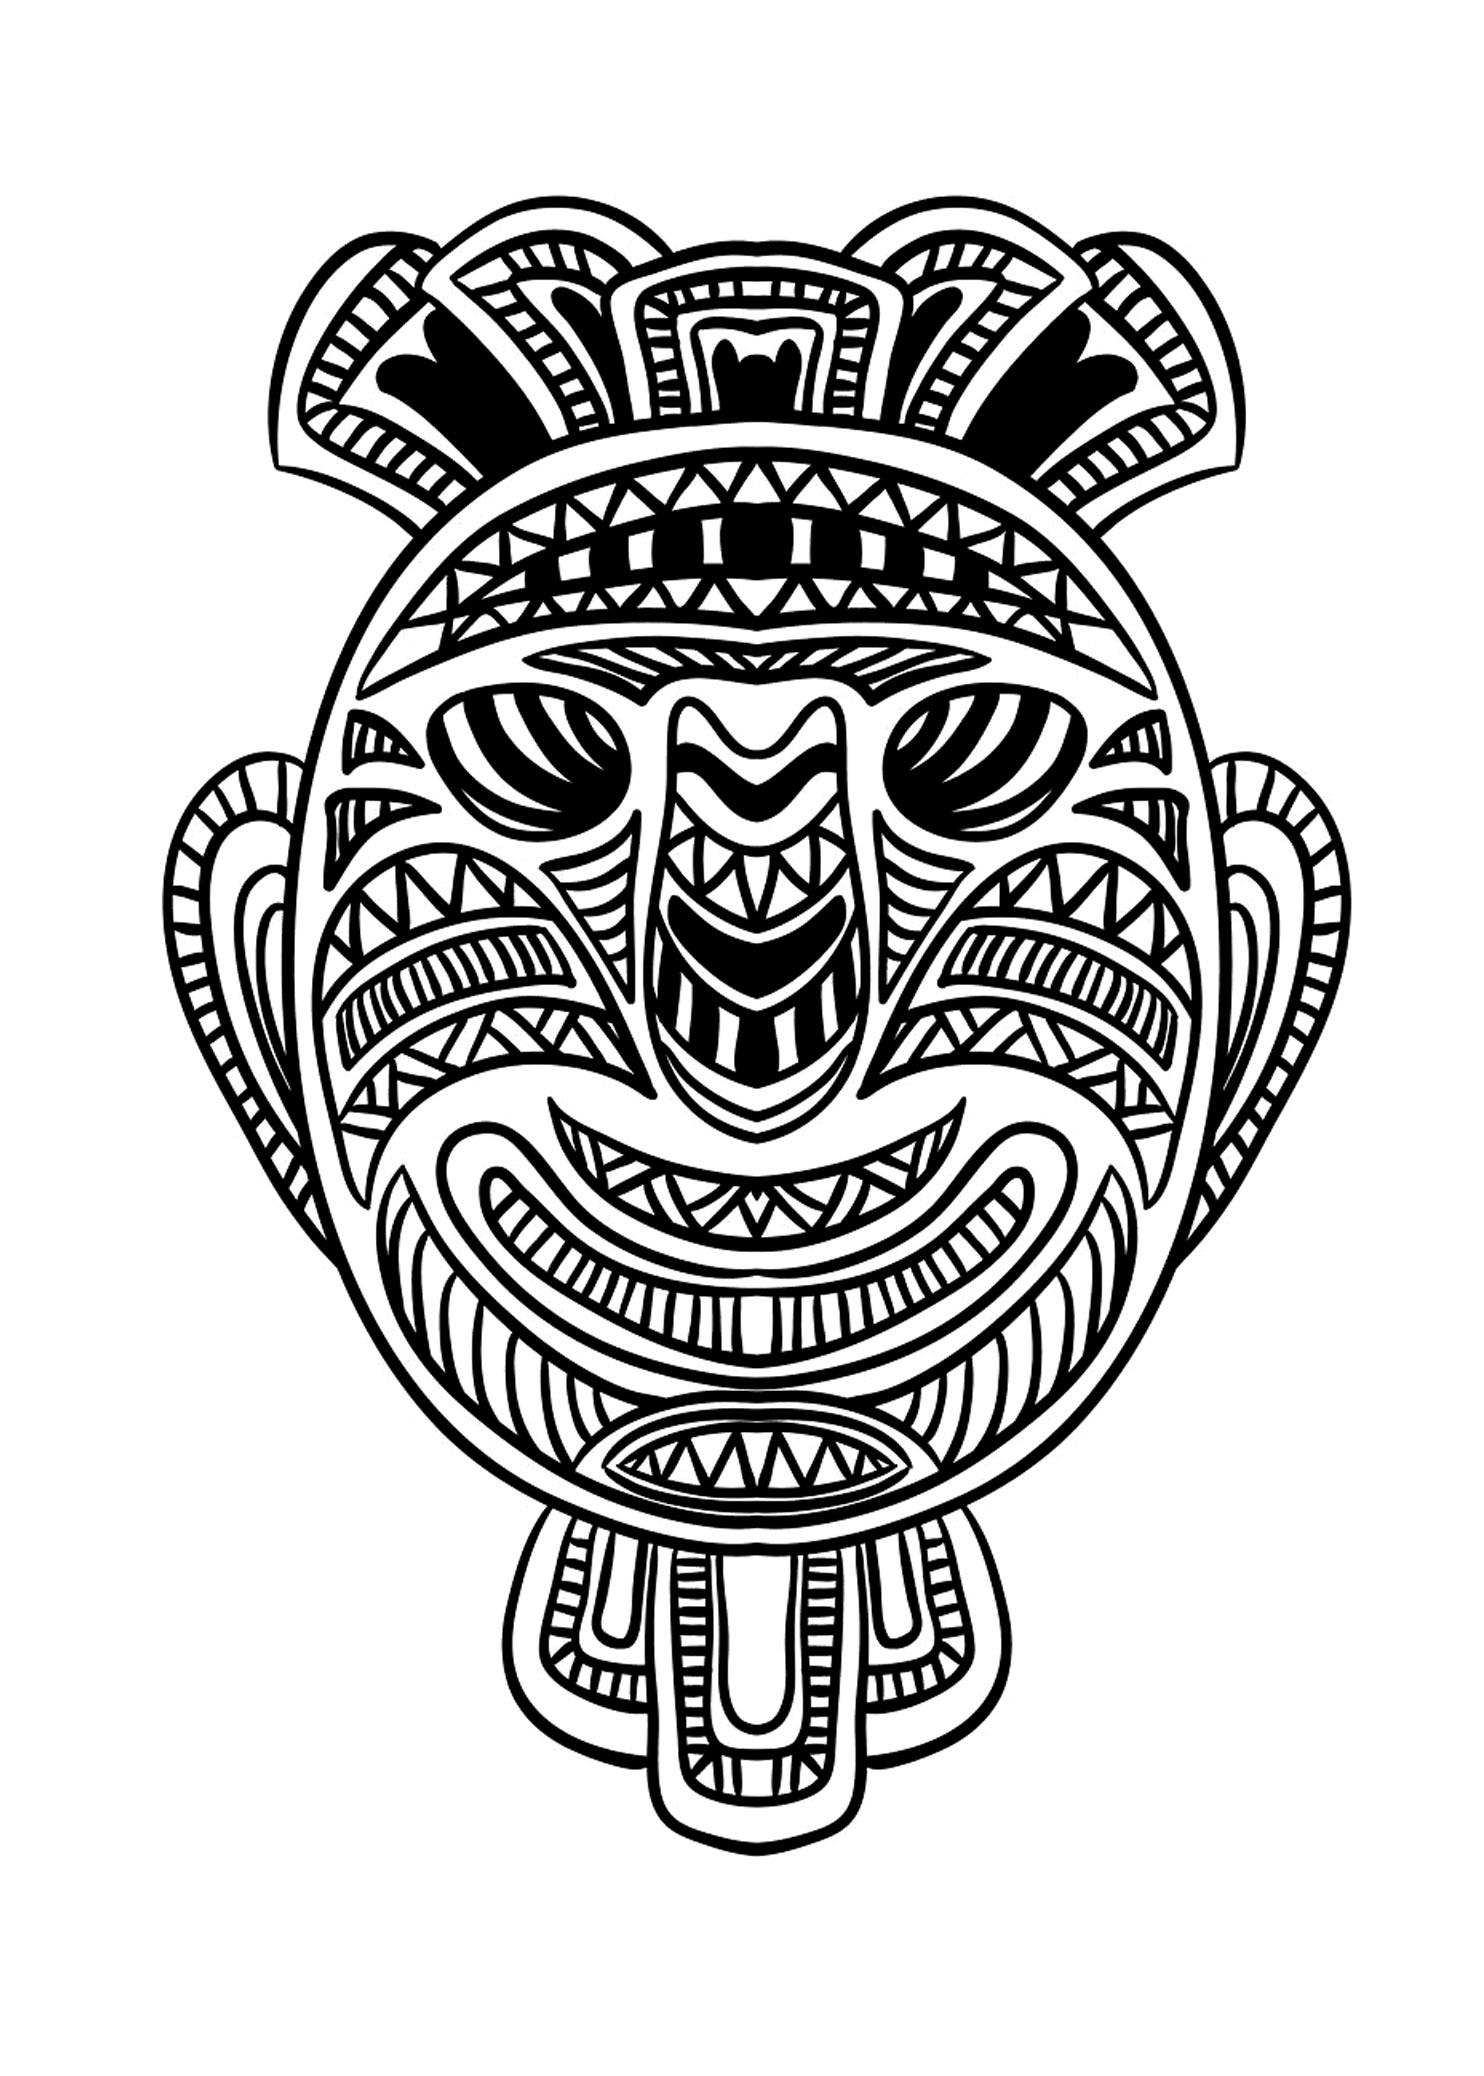 Coloring picture of an African mask - 1